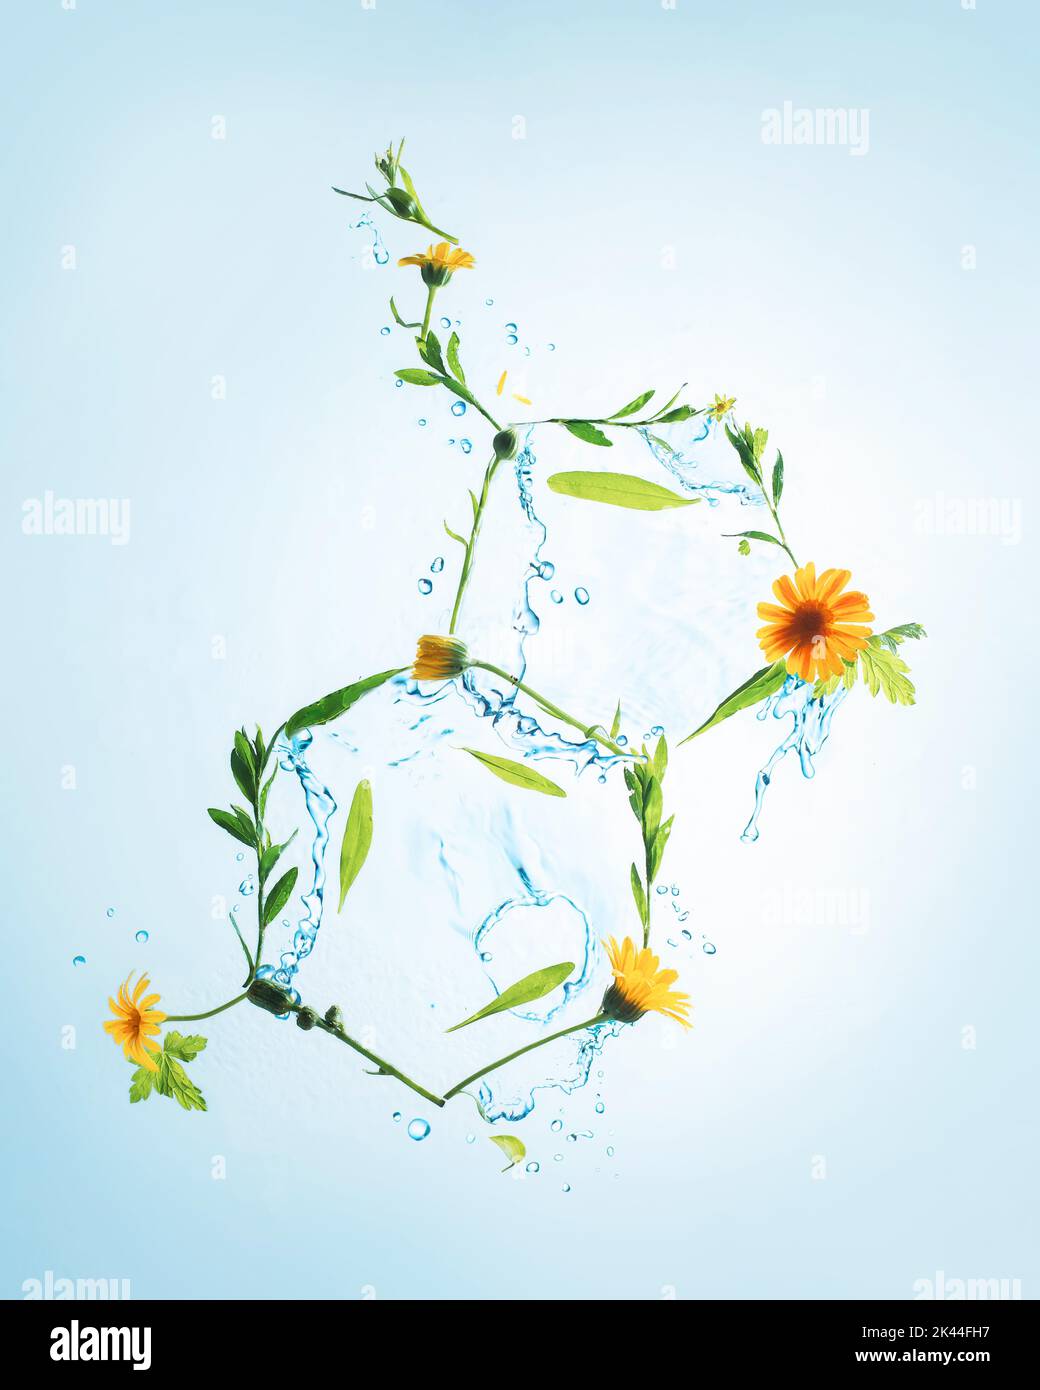 Serotonin molecule from flowers and splashes of water, joy of summer concept Stock Photo